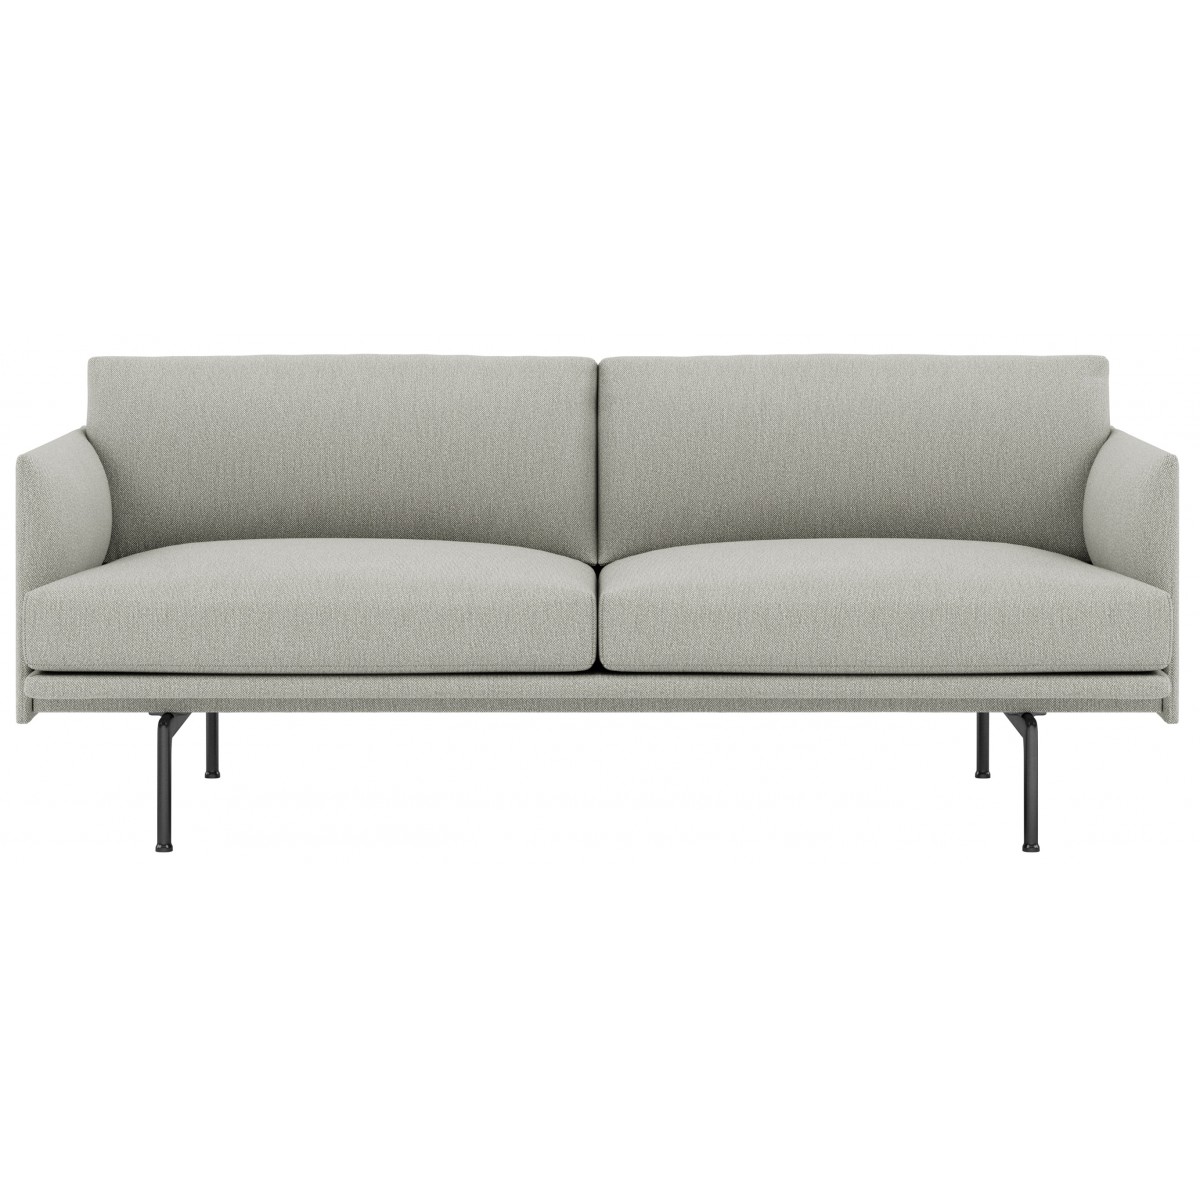 SOLD OUT - Clay 12 + black legs - Muuto sofa Outline 170 cm - OFFER